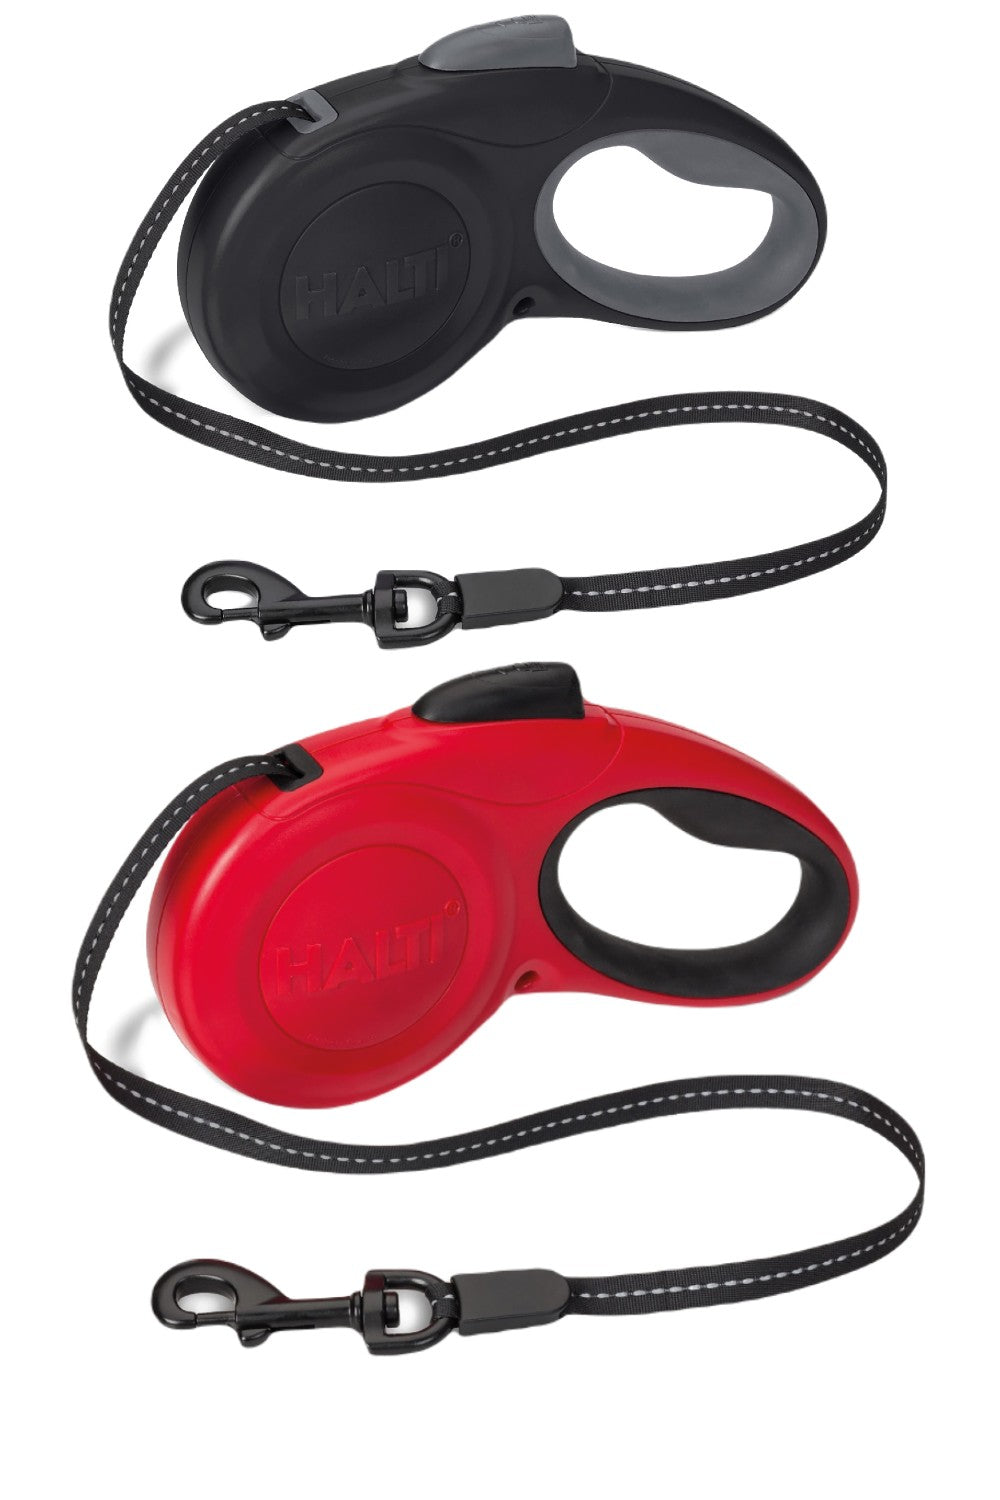 Halti Retractable Lead In Black and Red 